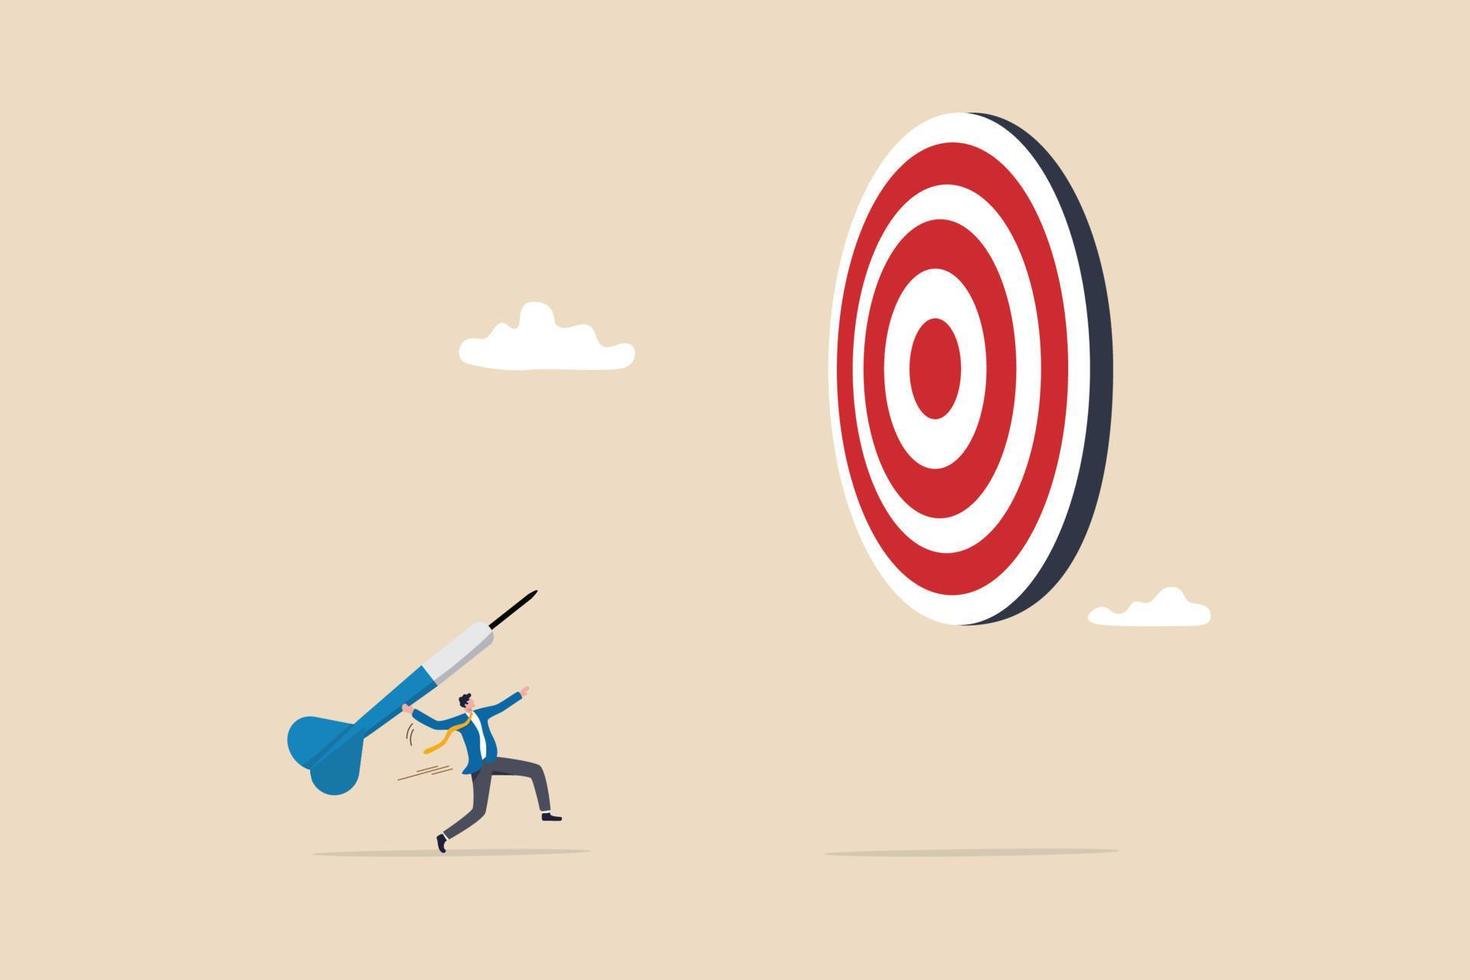 Aiming for big goal, challenge to achieve target, success or accuracy, ambition or determination to reach business target concept, businessman throwing huge dart, aiming to hit dartboard bullseye. vector